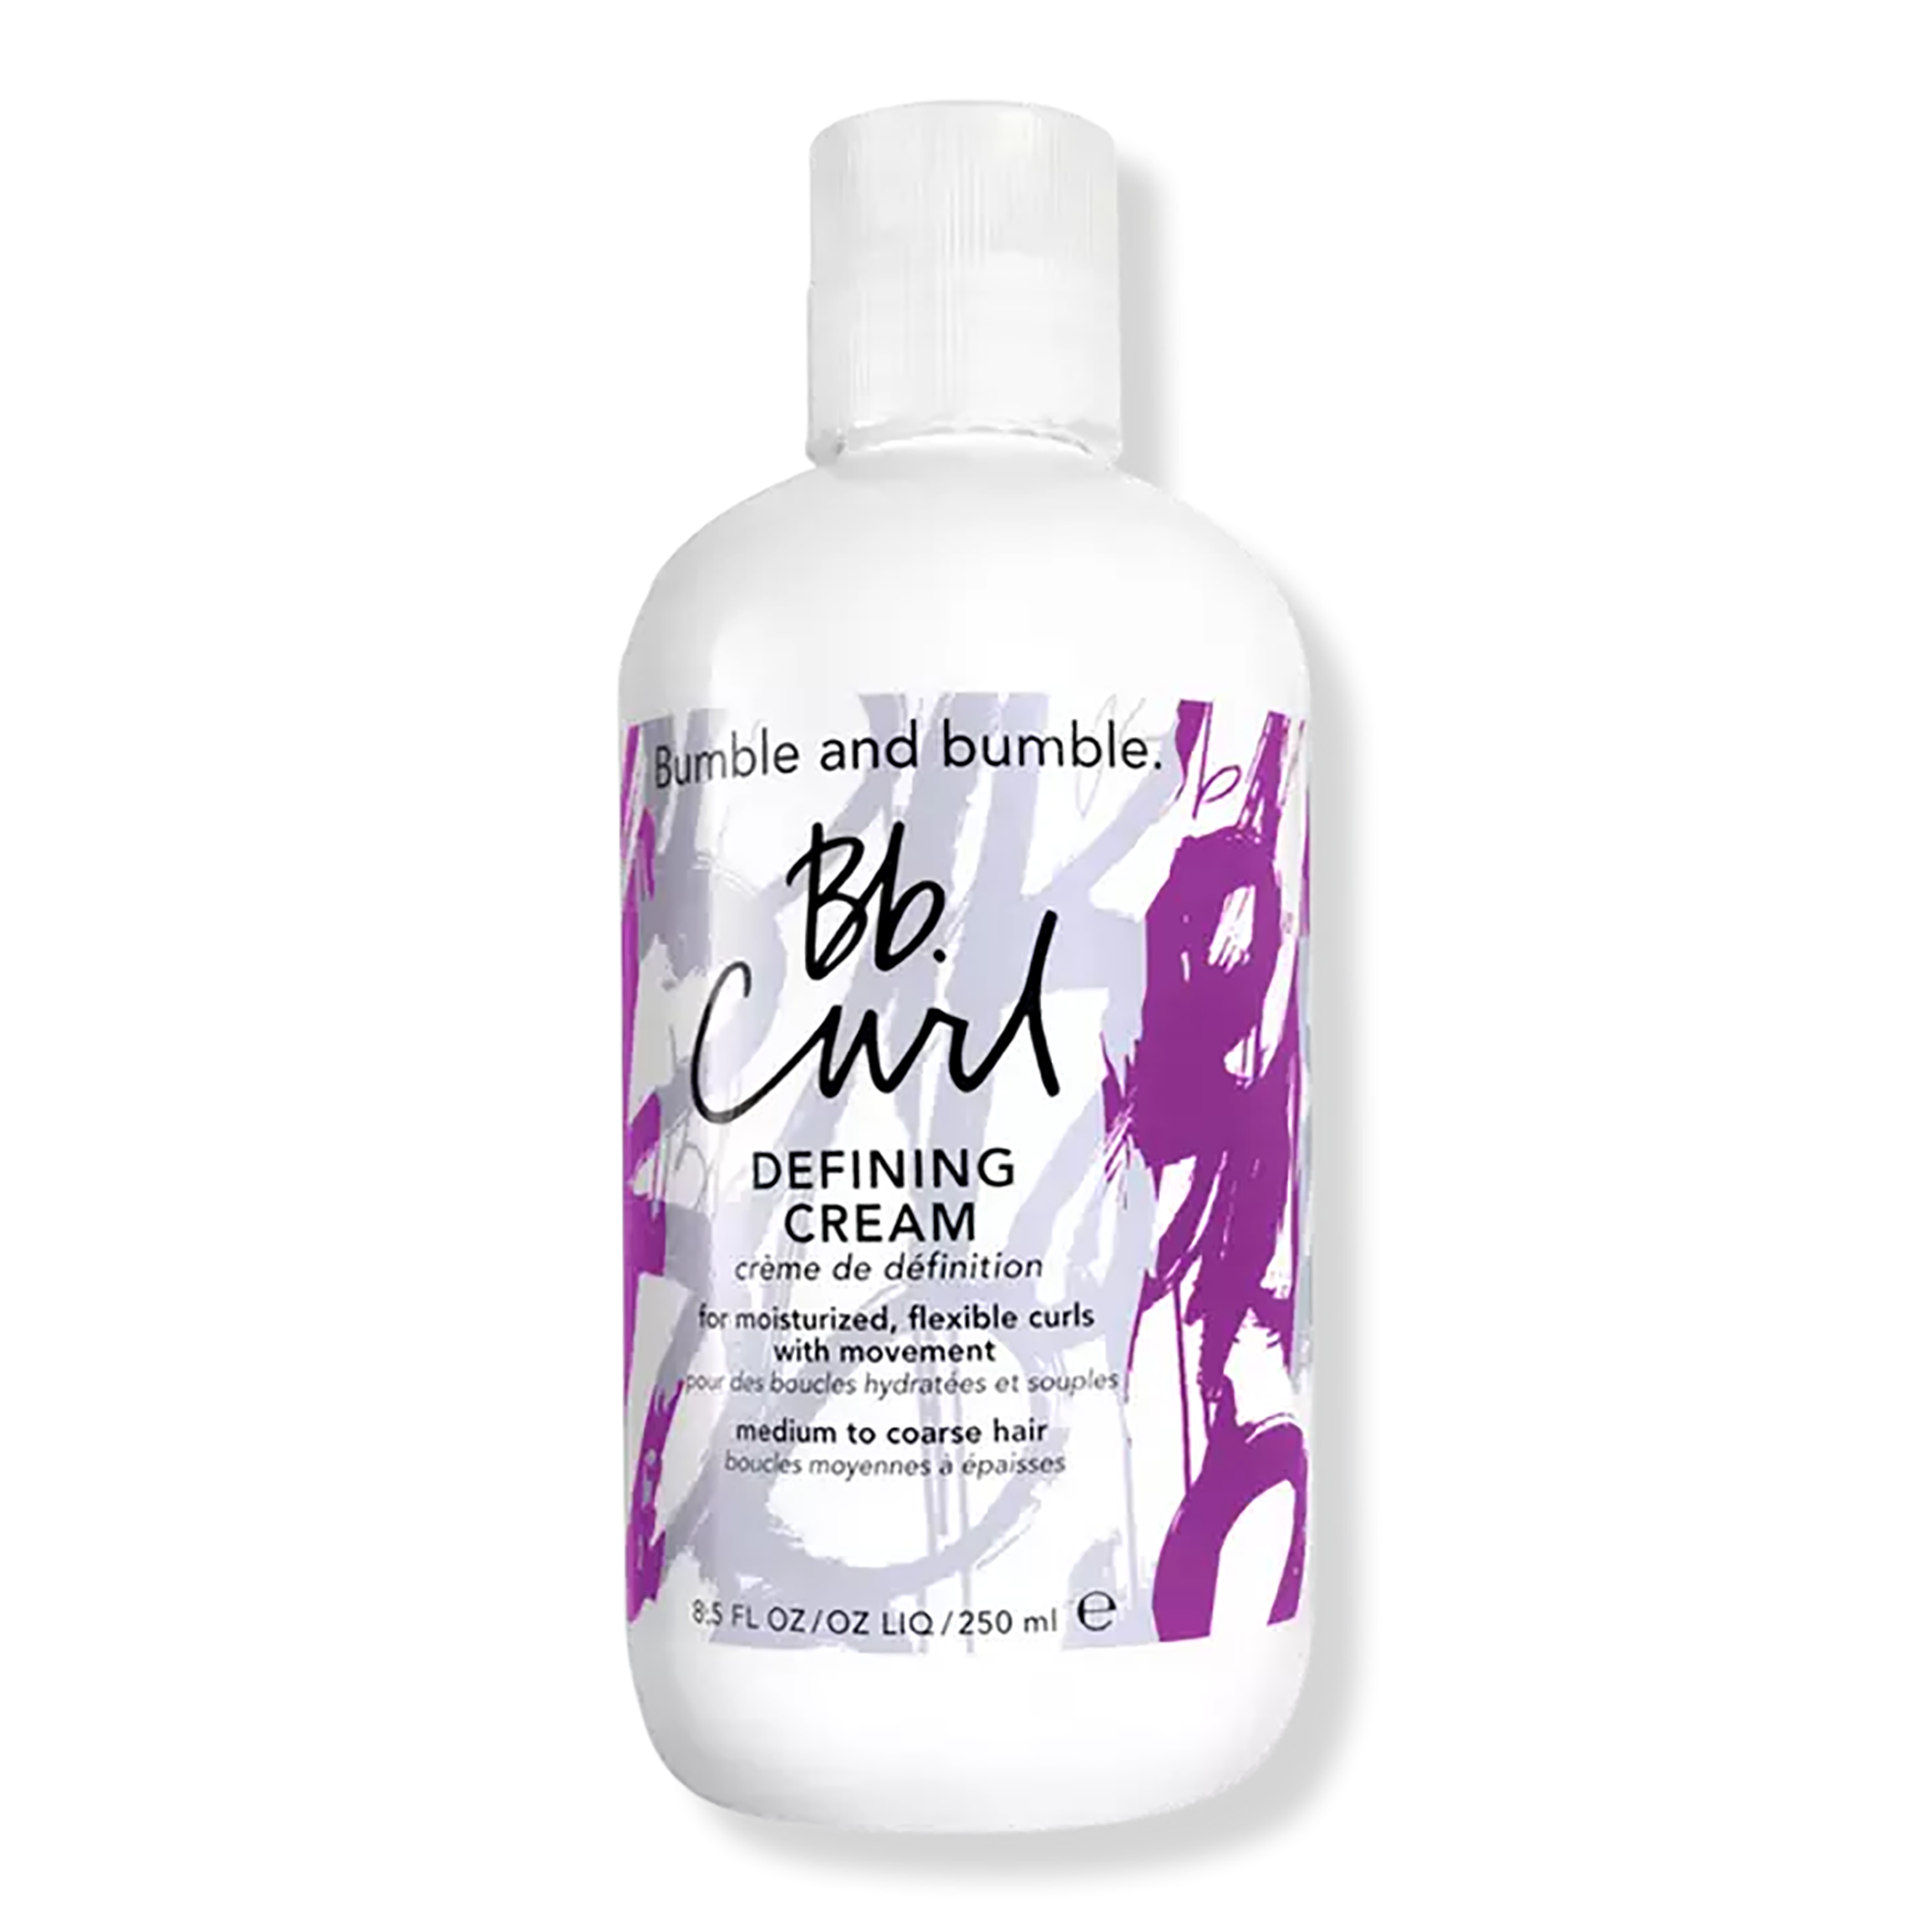 Bumble and Bumble Curl Defining Cream / 8.5OZ